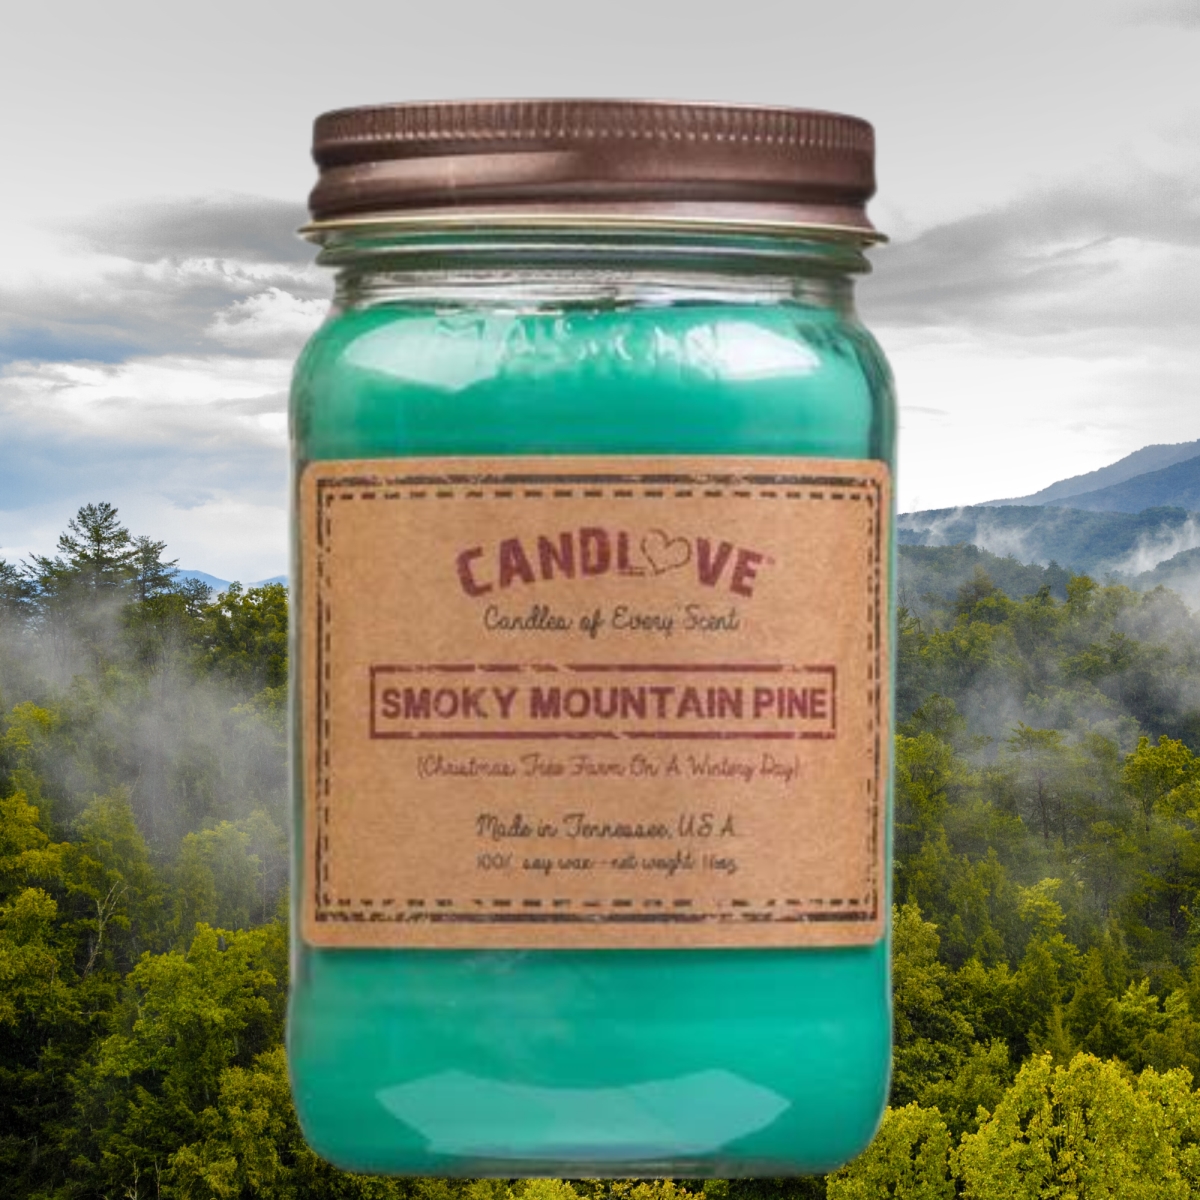 Picture of PPI SUPPLIES Smoky-C Candlove Smoky Mountain Pine Scented Candle - Non-Toxic 100% Soy Candle - Handmade & Hand Poured Long Burning Candle - Highly Scented All Natural Clean Burning Candle (16 OZ Mason Jar) Made in The USA